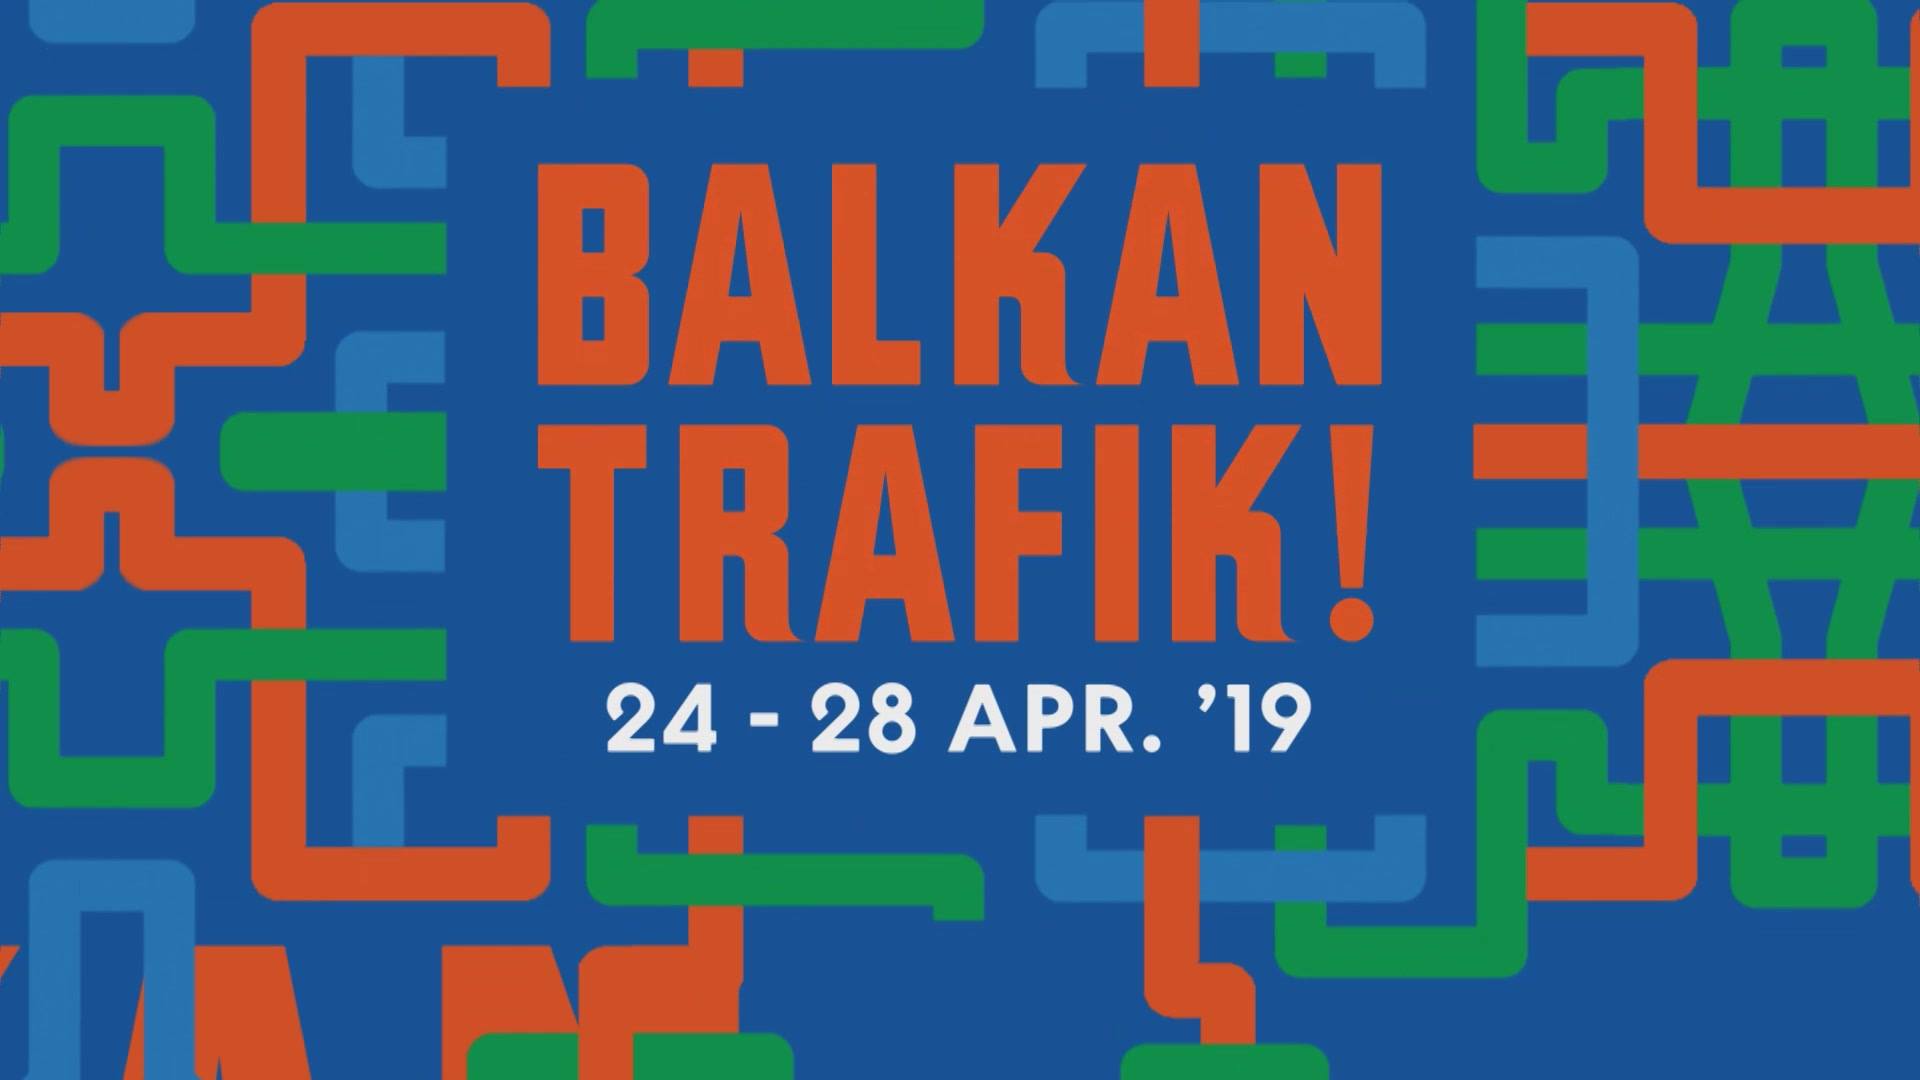 RCC's Tourism Development and Promotion Project promotes Balkan Trafik! Festival 2019, held in Brussels on 24-28 April (Illustration: Balkan Trafik! Festival)